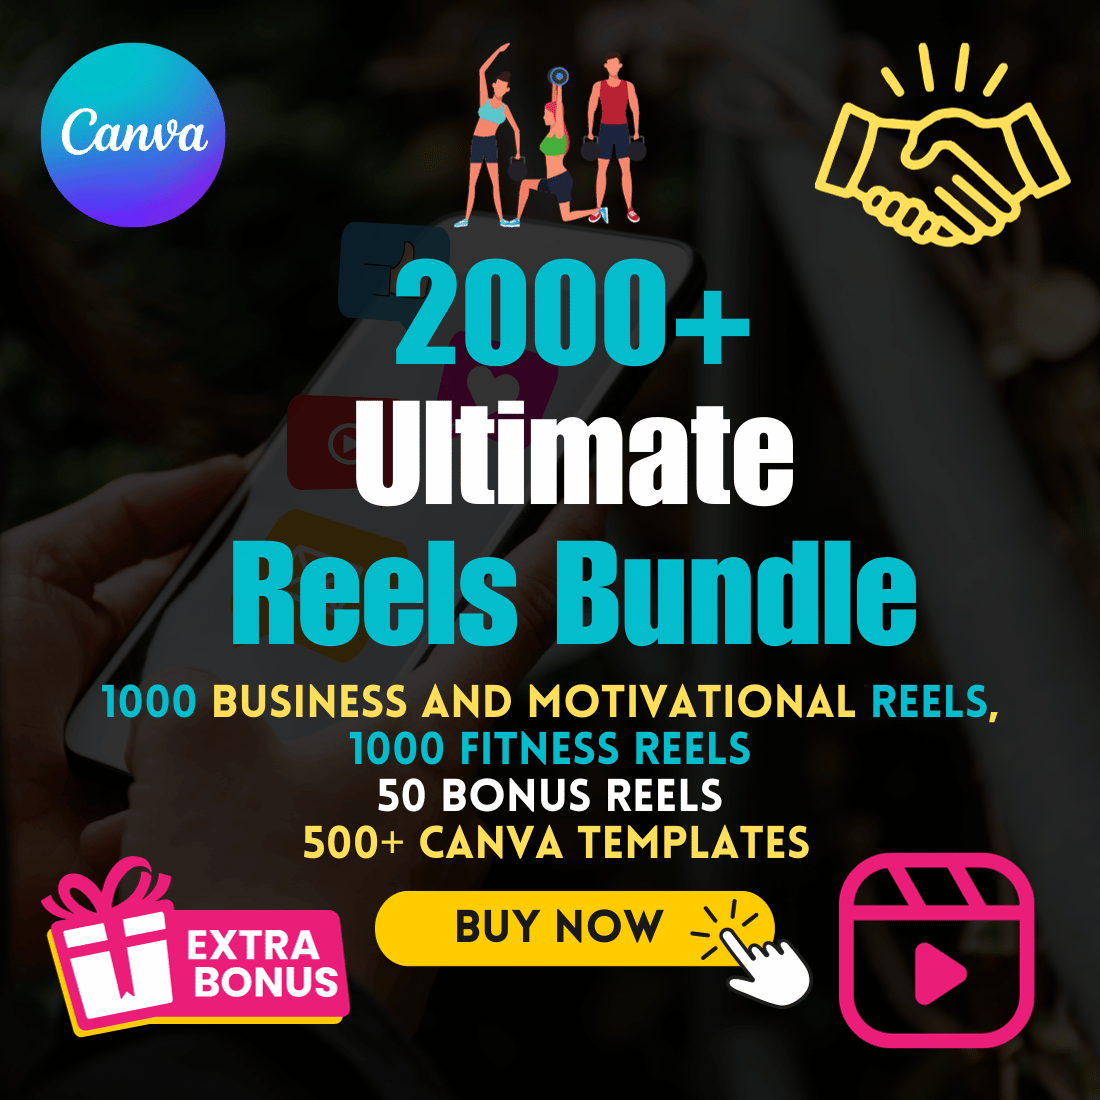 2,000+ Ultimate Reels & Canva Templates Bundle – Motivation, Fitness, Business, Quotes – Boost Your Brand & Engagement In Just $19 cover image.